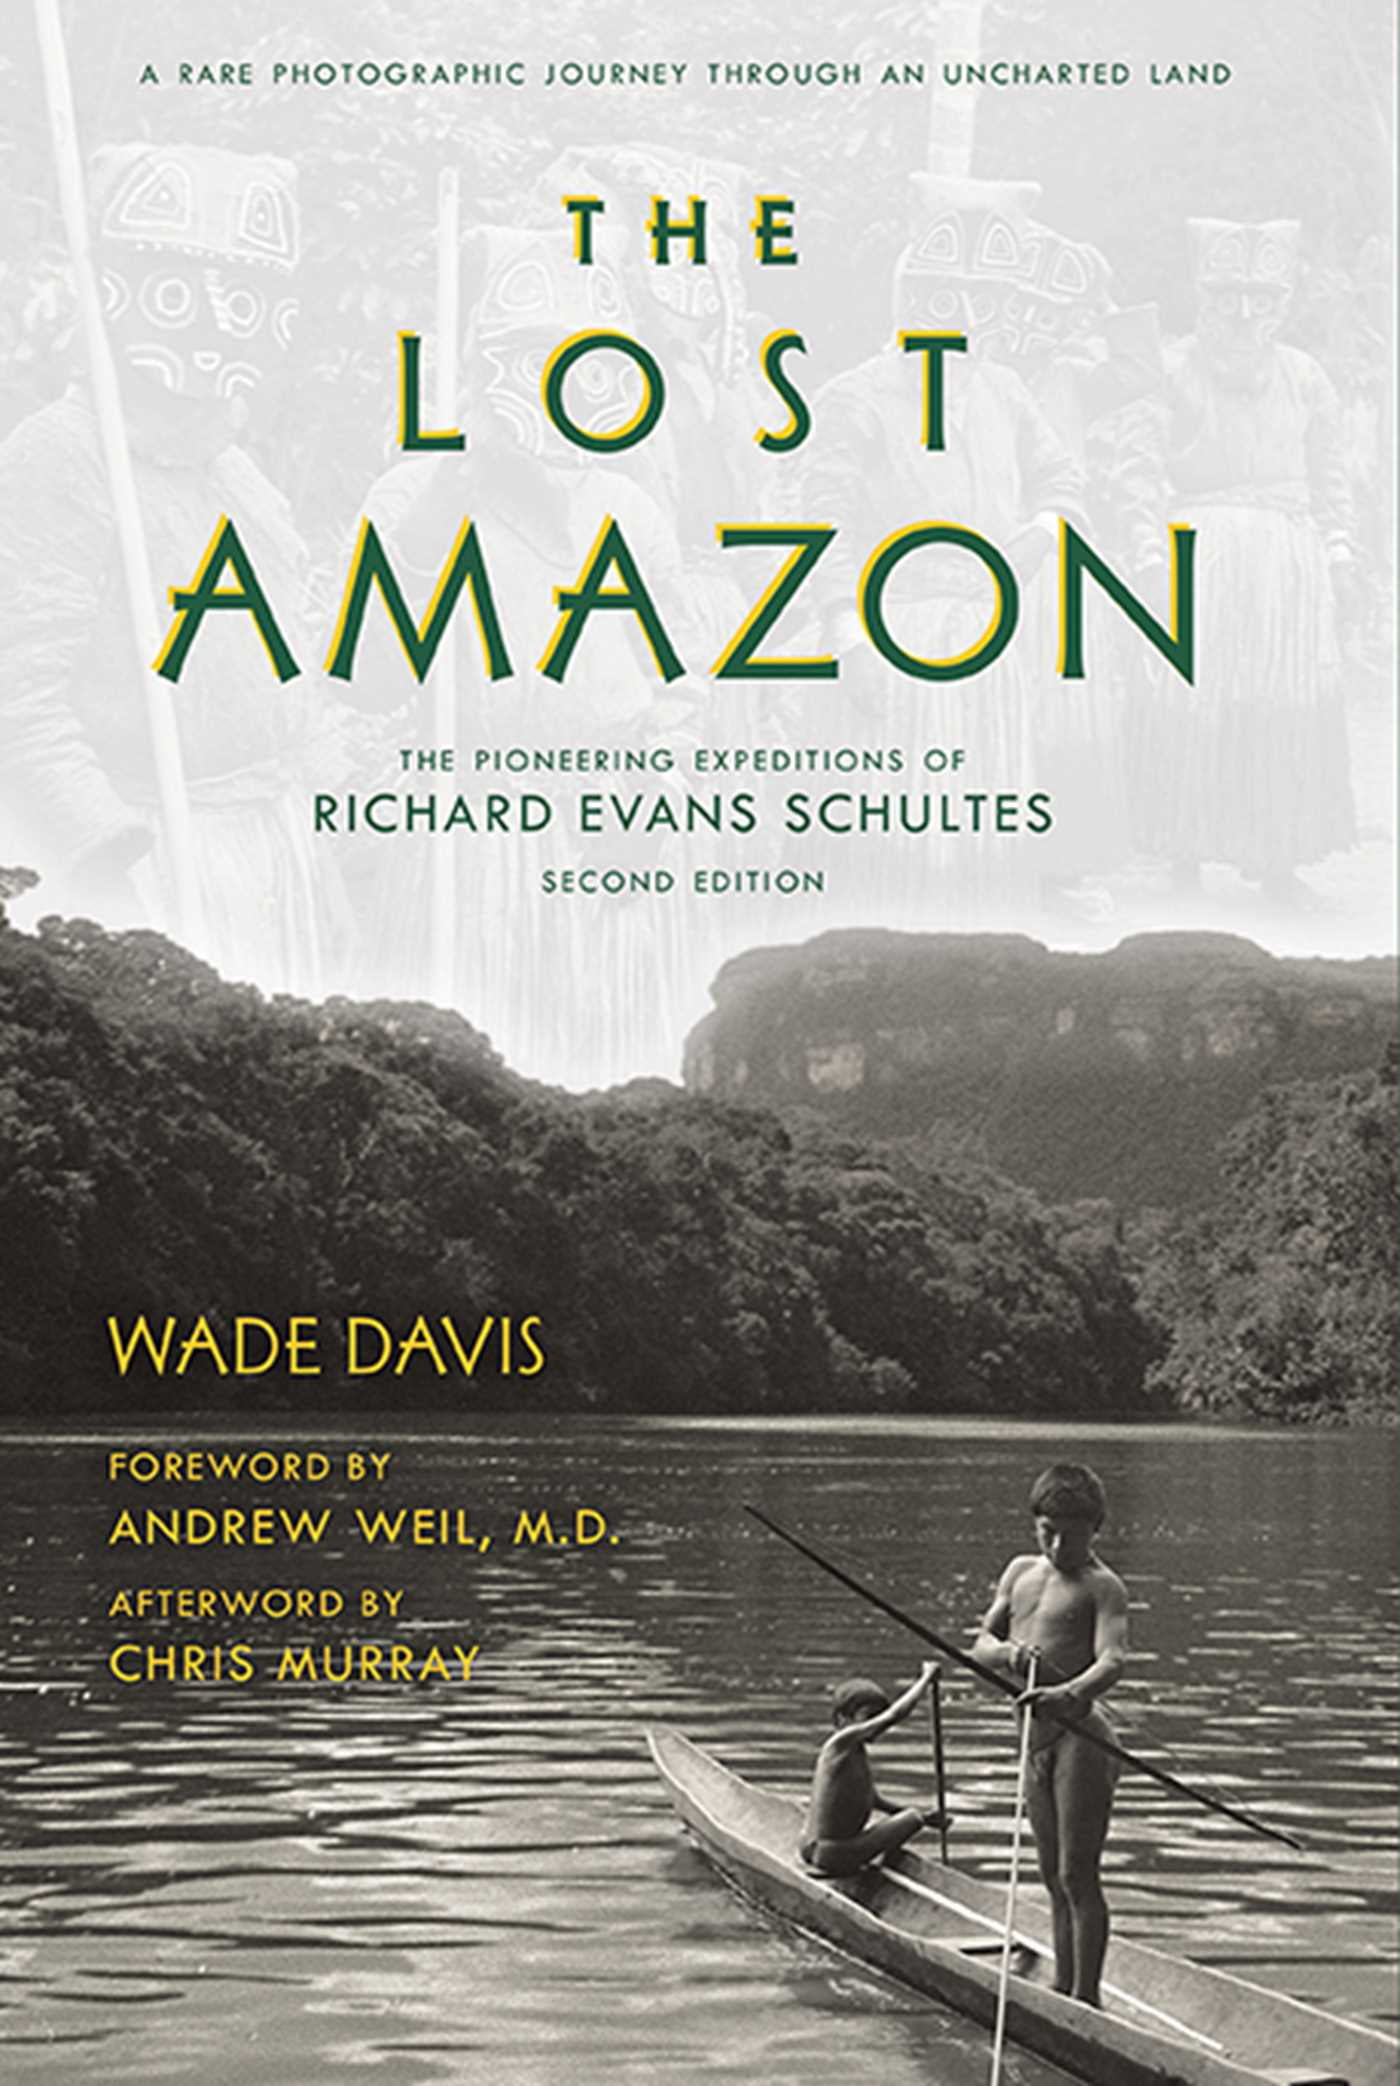 The Lost Amazon The Pioneering Expeditions of Richard Evans Schultes